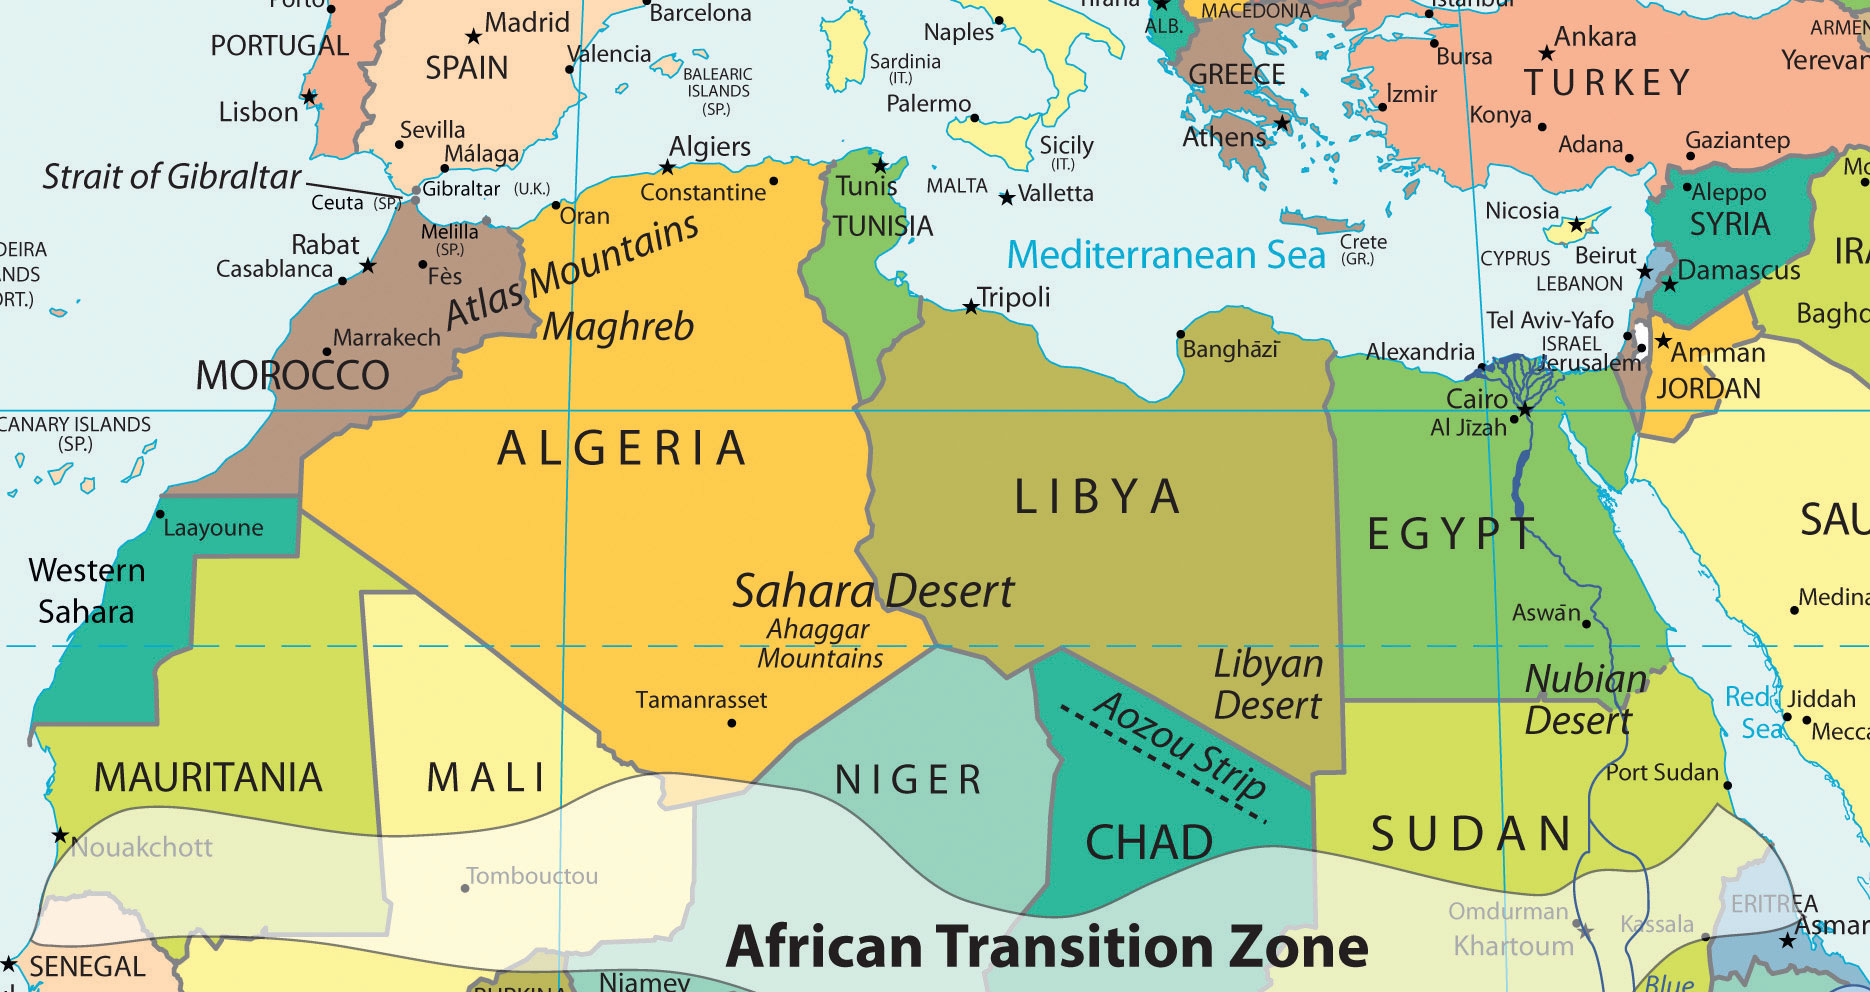 North Africa and the African Transition Zone